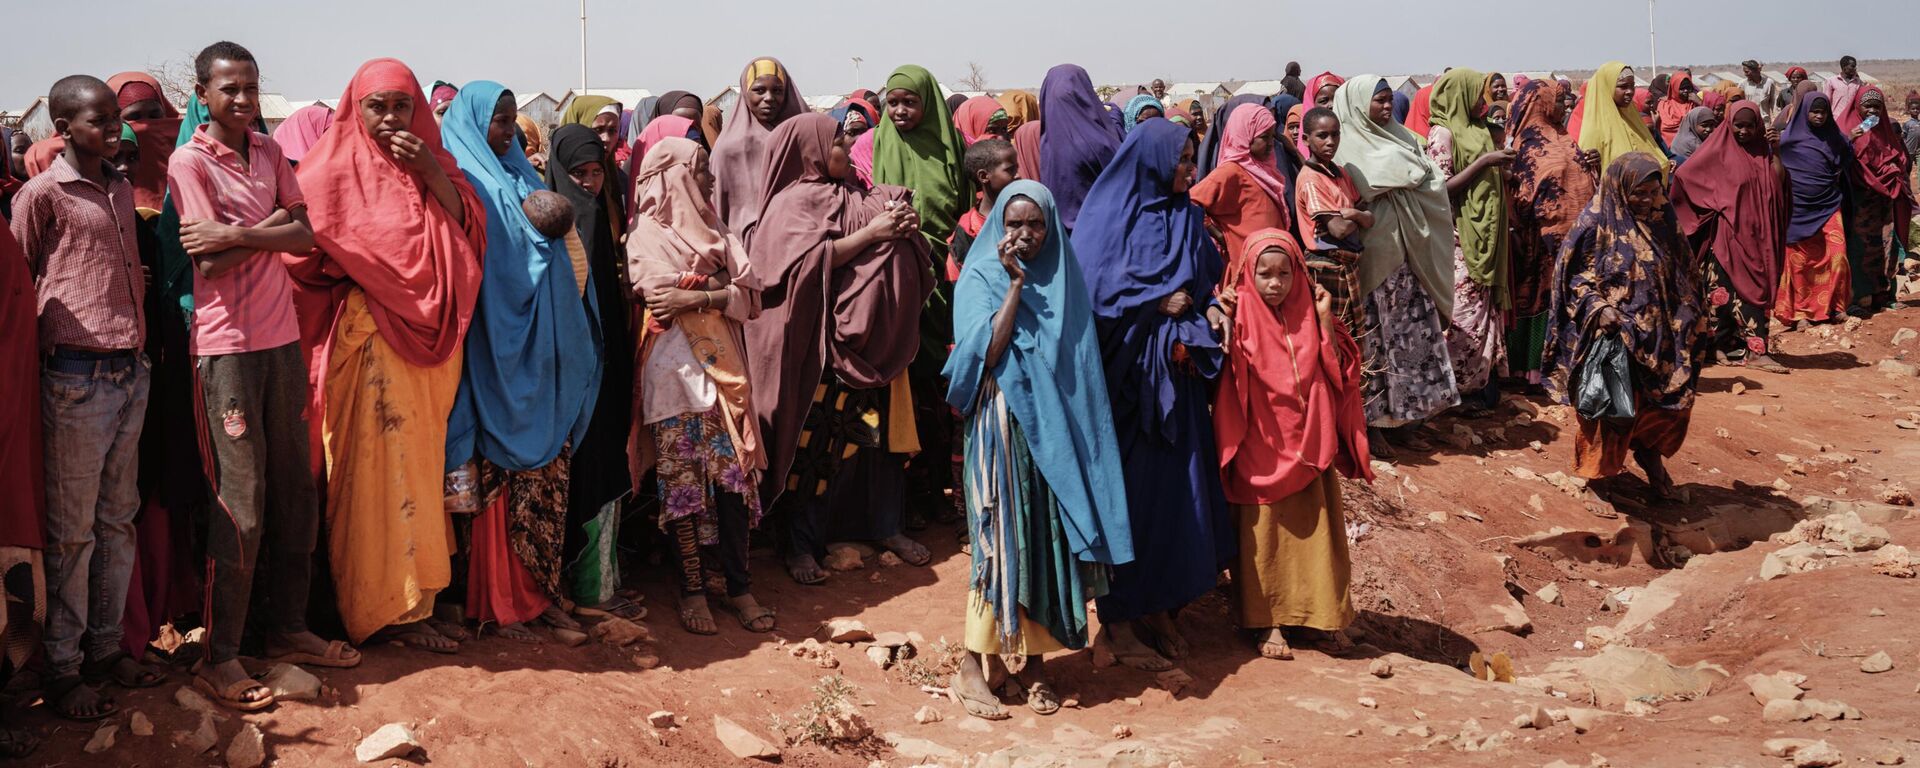 People wait for food distributions and health services at a camp for internally displaced persons (IDPs) in Baidoa, Somalia, on February 14, 2022 - Sputnik International, 1920, 14.10.2022